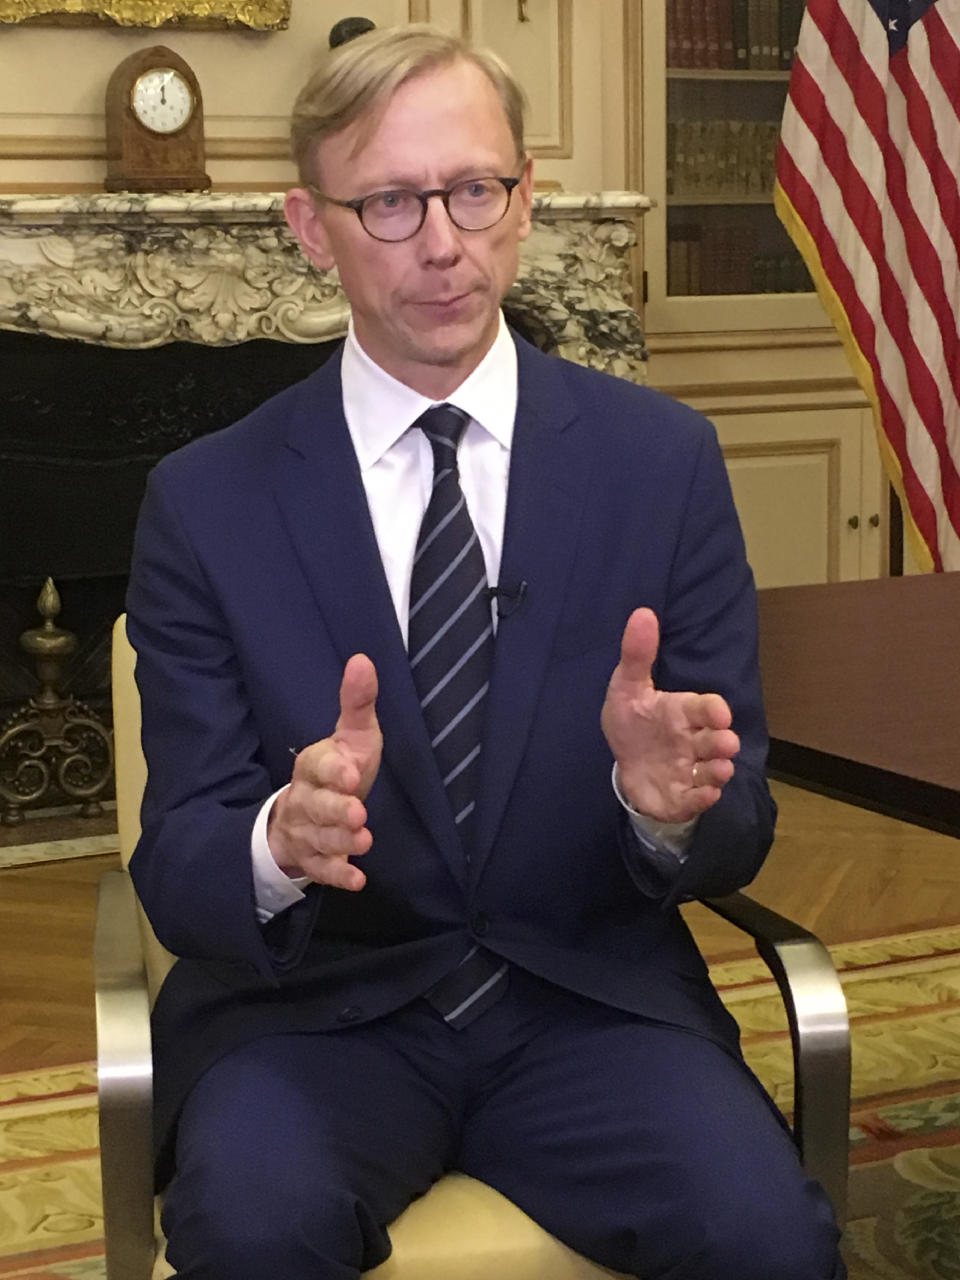 Brian Hook, the U.S. special envoy for Iran, gestures during an interview in Paris, Thursday, June 27, 2019. Brian Hook is meeting with top French, German and British diplomats in Paris for talks on the Persian Gulf crisis at a time when European powers are trying to save the 2015 nuclear deal with Tehran. (AP Photo/Nicolas Garriga)